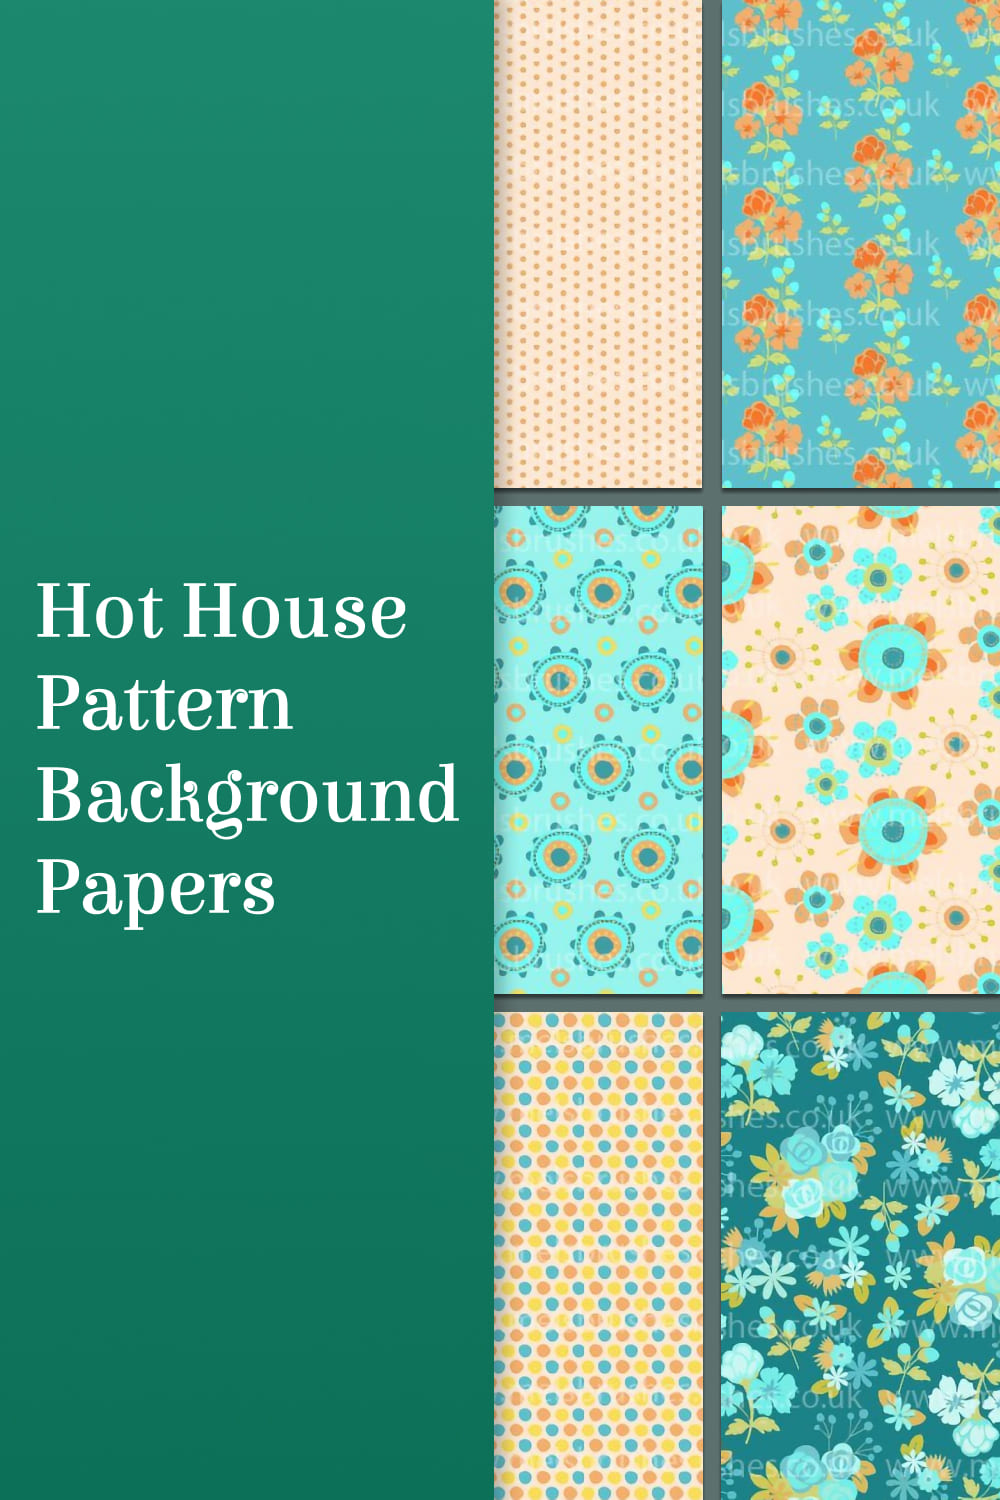 Hot house pattern background papers - pinterest image preview.